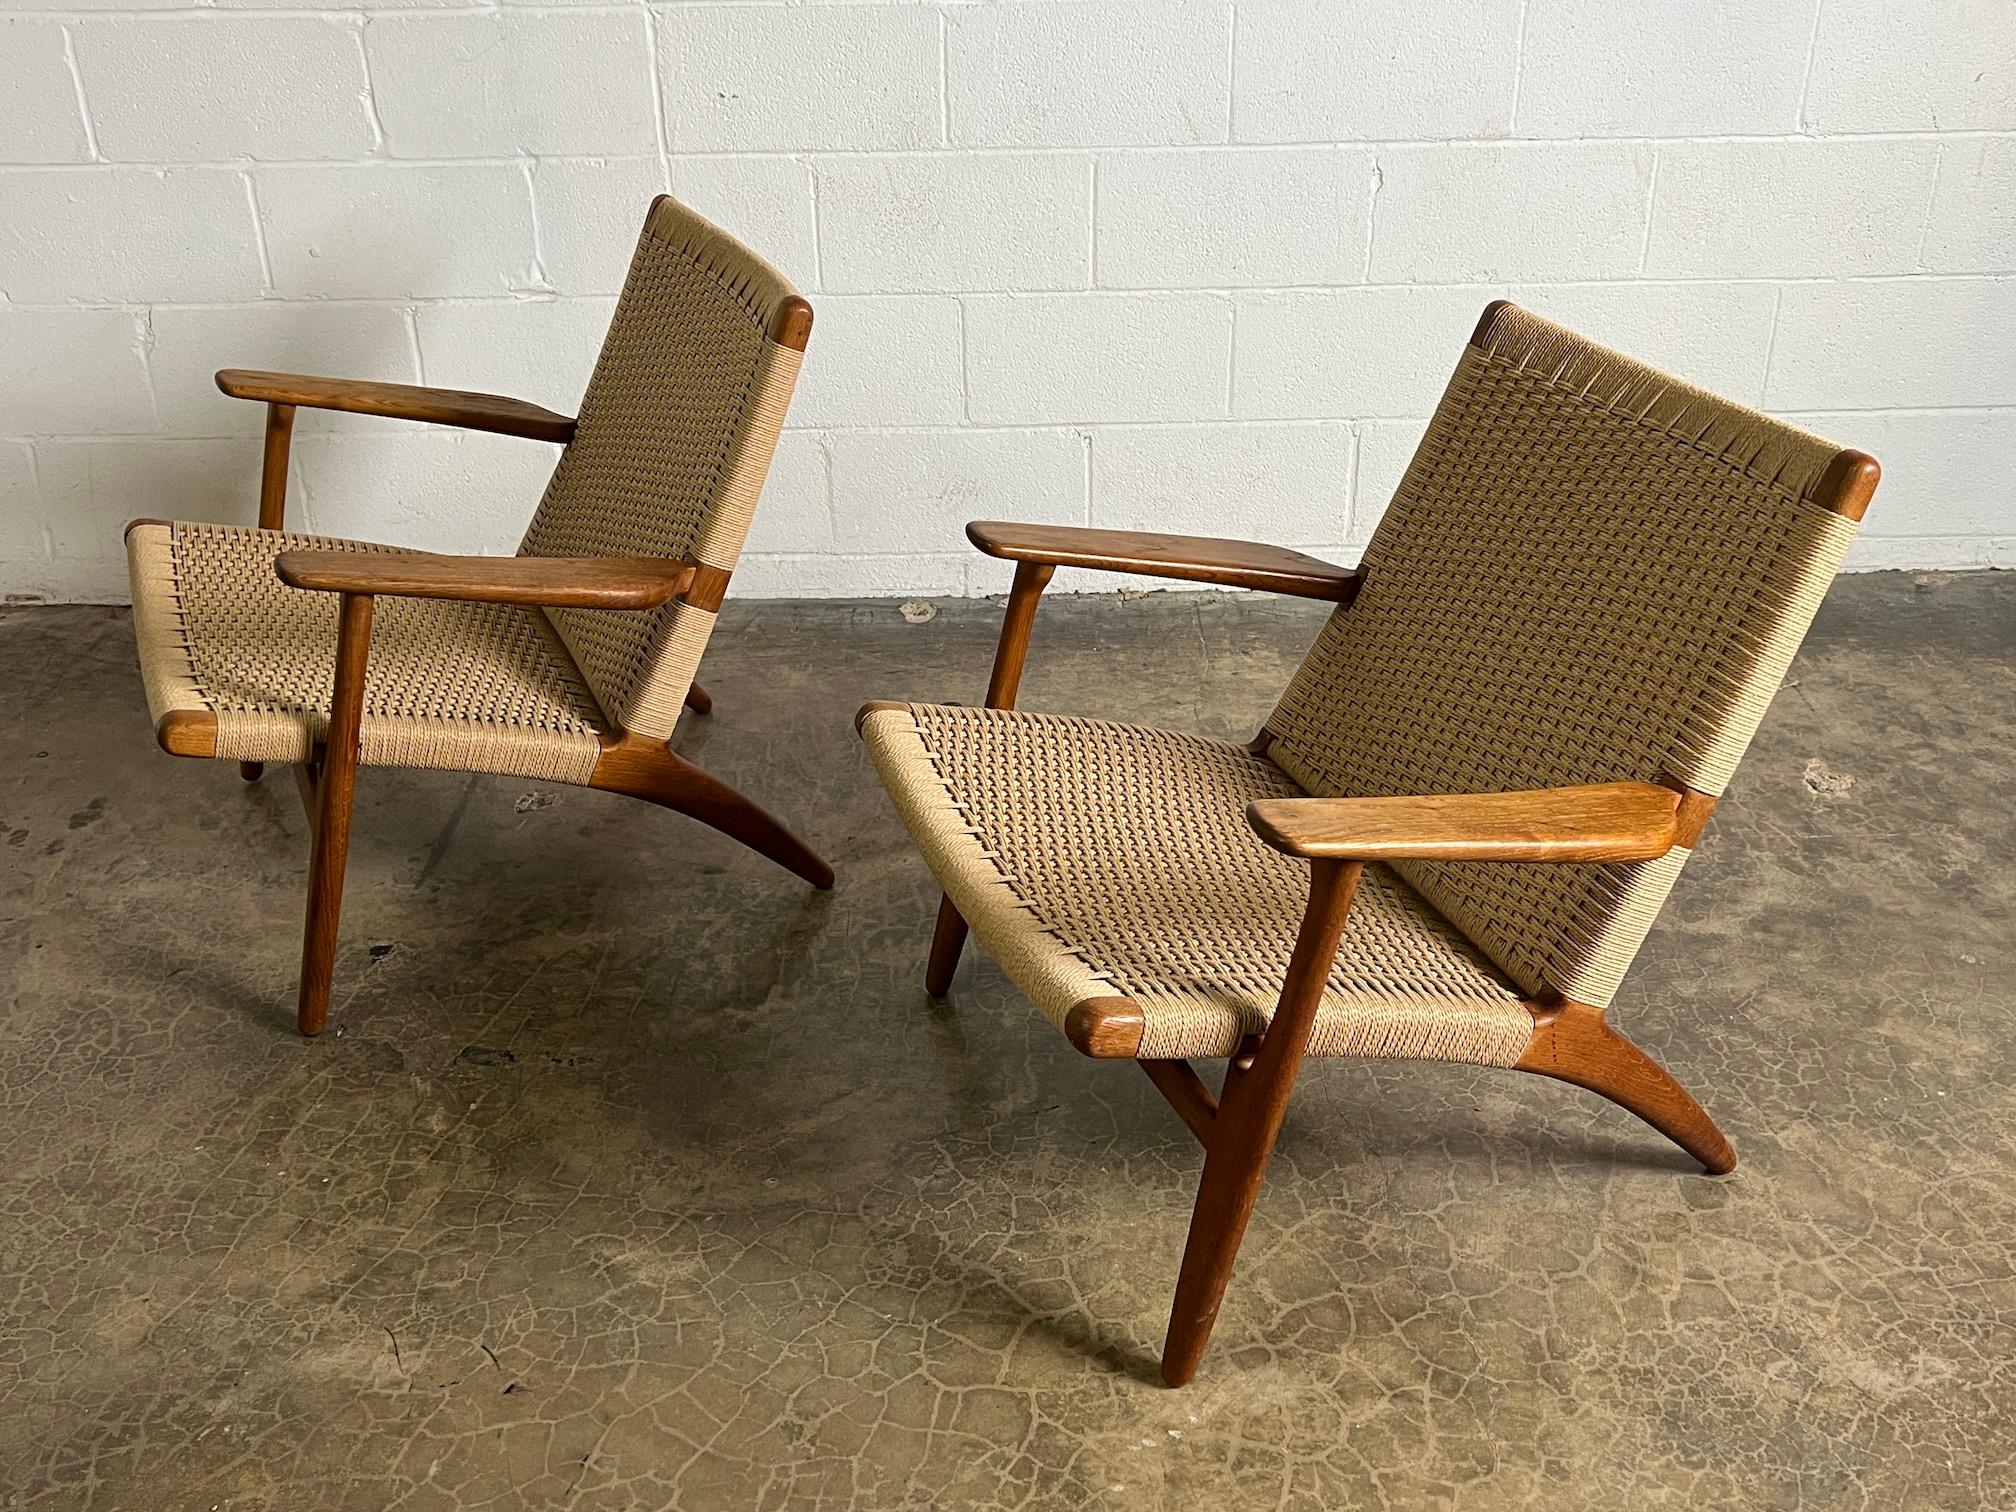 A beautiful pair of Oak and Danish cord CH-25 lounge chairs by Hans Wegner for Carl Hansen & Son.